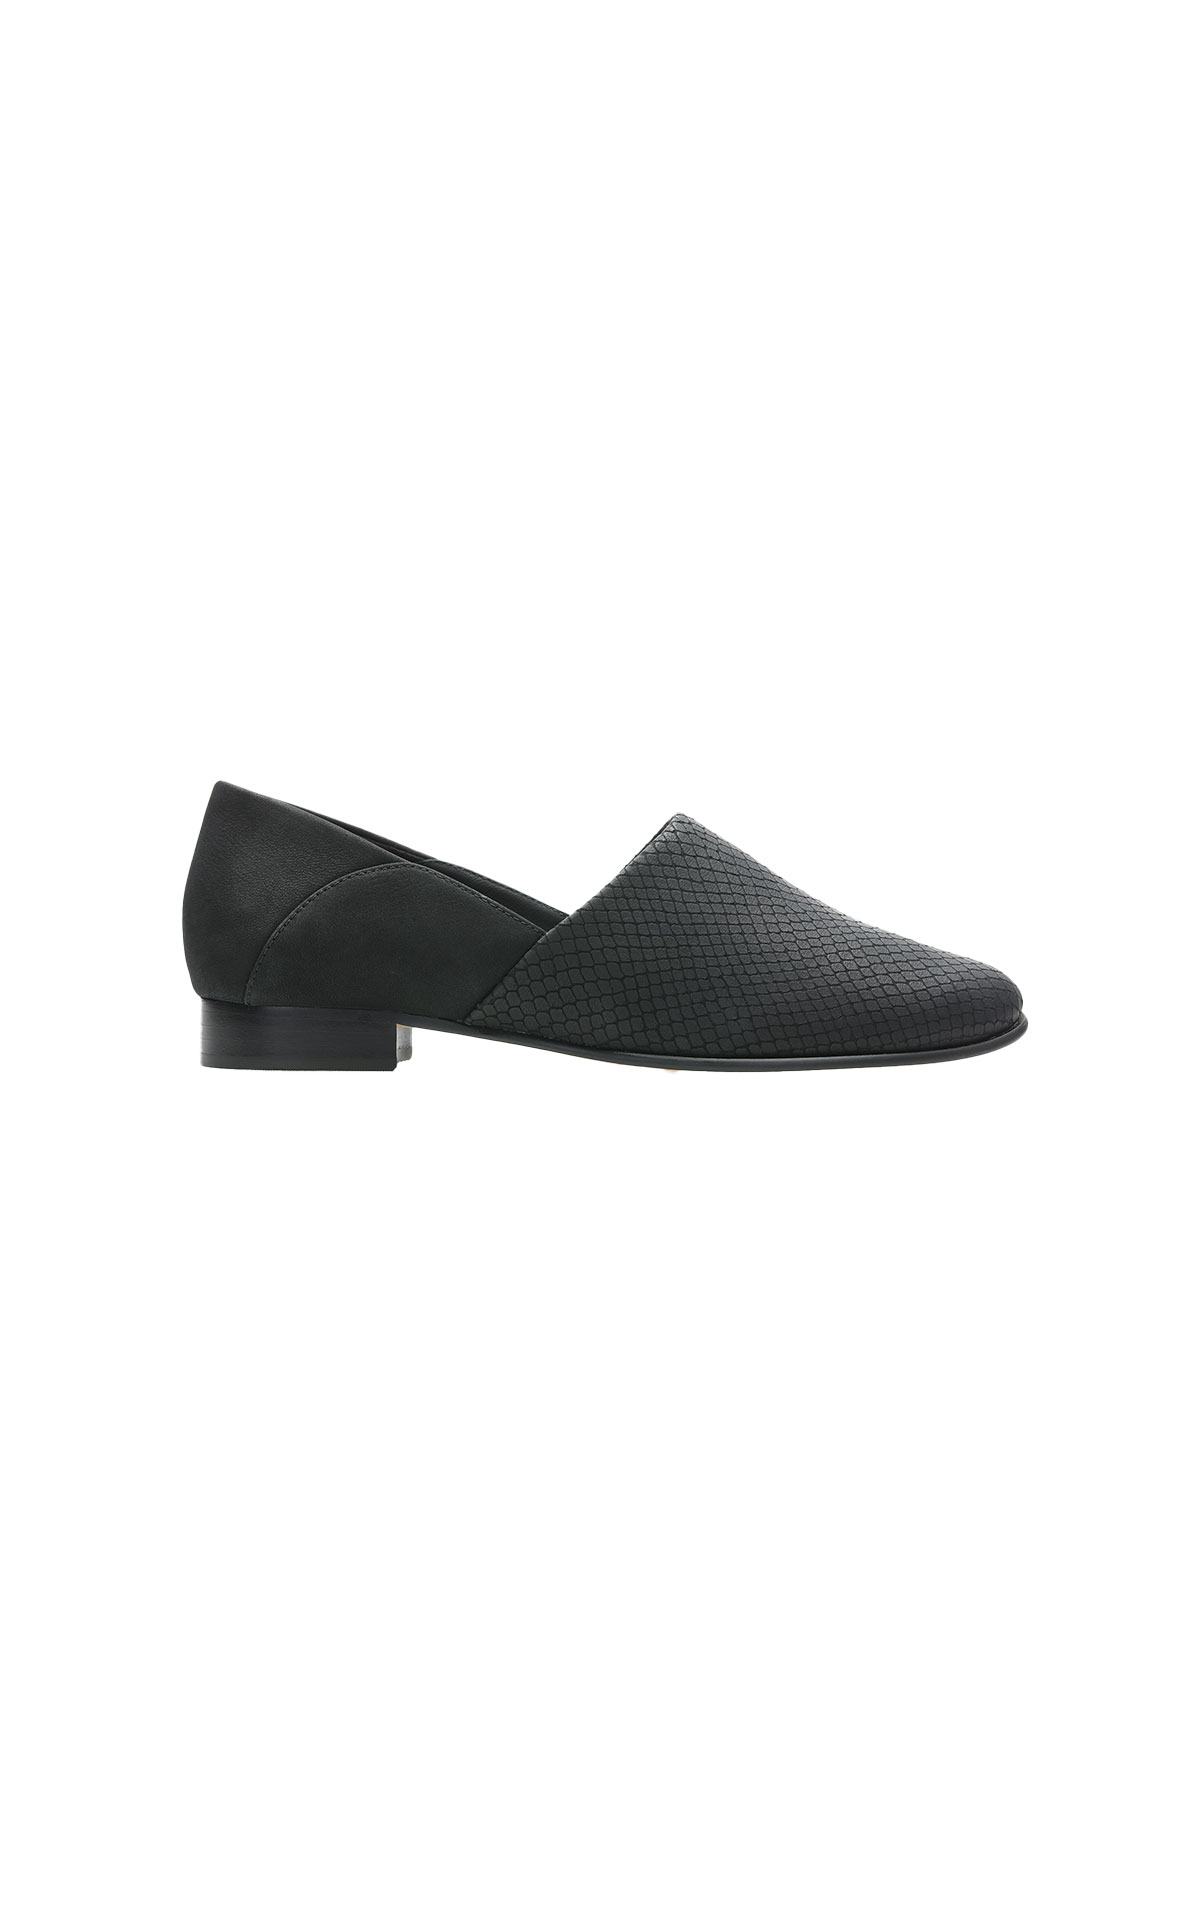 Clarks Pure tone black from Bicester Village